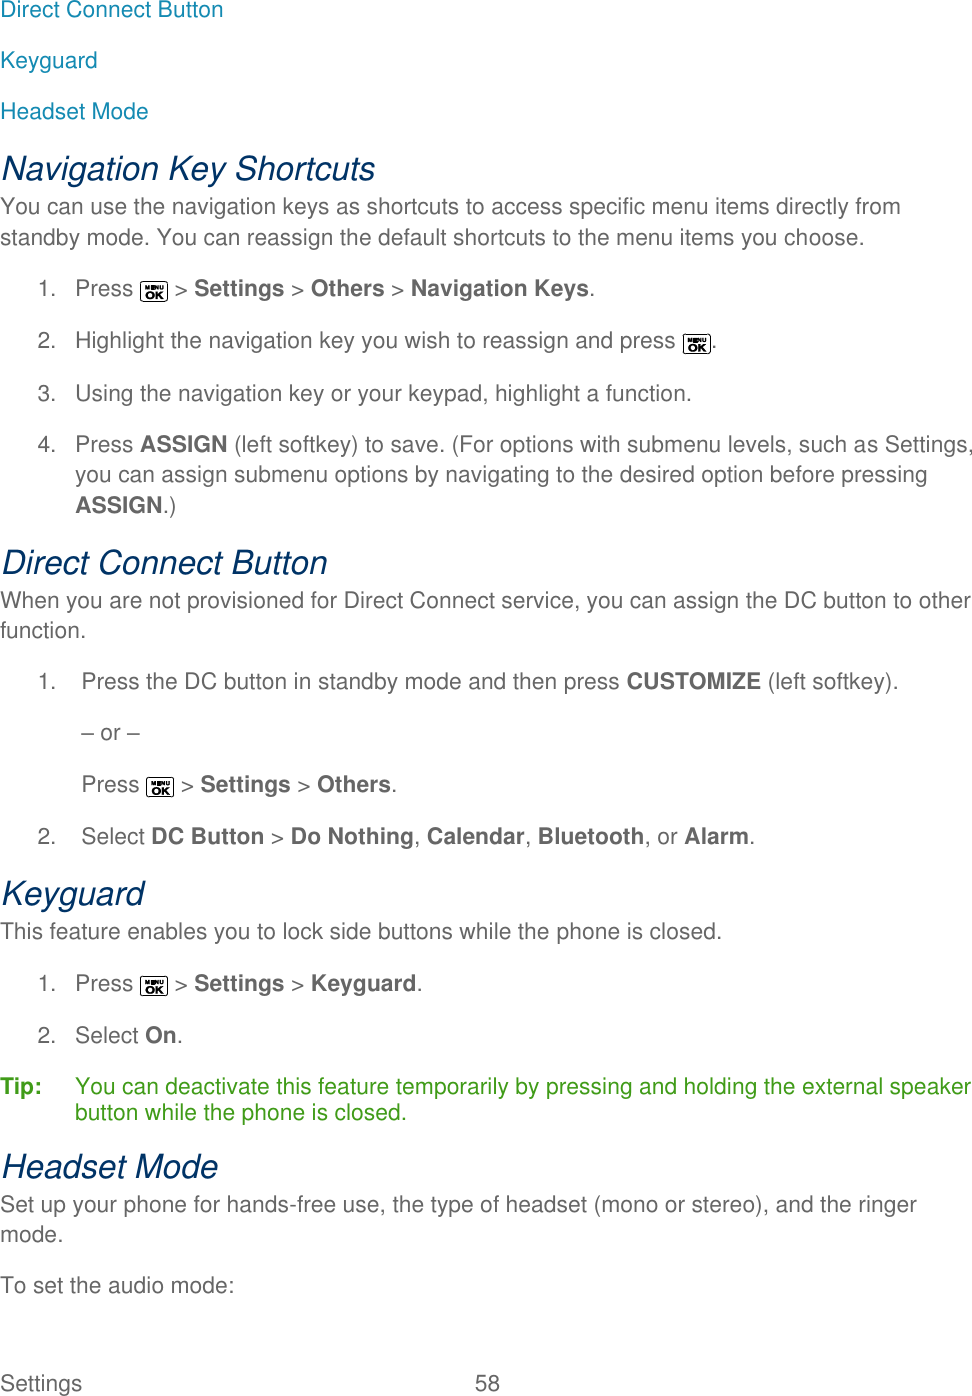  Settings  58   Direct Connect Button Keyguard Headset Mode Navigation Key Shortcuts You can use the navigation keys as shortcuts to access specific menu items directly from standby mode. You can reassign the default shortcuts to the menu items you choose. 1.  Press   &gt; Settings &gt; Others &gt; Navigation Keys. 2.  Highlight the navigation key you wish to reassign and press  . 3.  Using the navigation key or your keypad, highlight a function. 4.  Press ASSIGN (left softkey) to save. (For options with submenu levels, such as Settings, you can assign submenu options by navigating to the desired option before pressing ASSIGN.) Direct Connect Button When you are not provisioned for Direct Connect service, you can assign the DC button to other function. 1.  Press the DC button in standby mode and then press CUSTOMIZE (left softkey). – or – Press   &gt; Settings &gt; Others. 2.  Select DC Button &gt; Do Nothing, Calendar, Bluetooth, or Alarm. Keyguard This feature enables you to lock side buttons while the phone is closed. 1.  Press   &gt; Settings &gt; Keyguard. 2.  Select On. Tip:   You can deactivate this feature temporarily by pressing and holding the external speaker button while the phone is closed. Headset Mode Set up your phone for hands-free use, the type of headset (mono or stereo), and the ringer mode. To set the audio mode: 